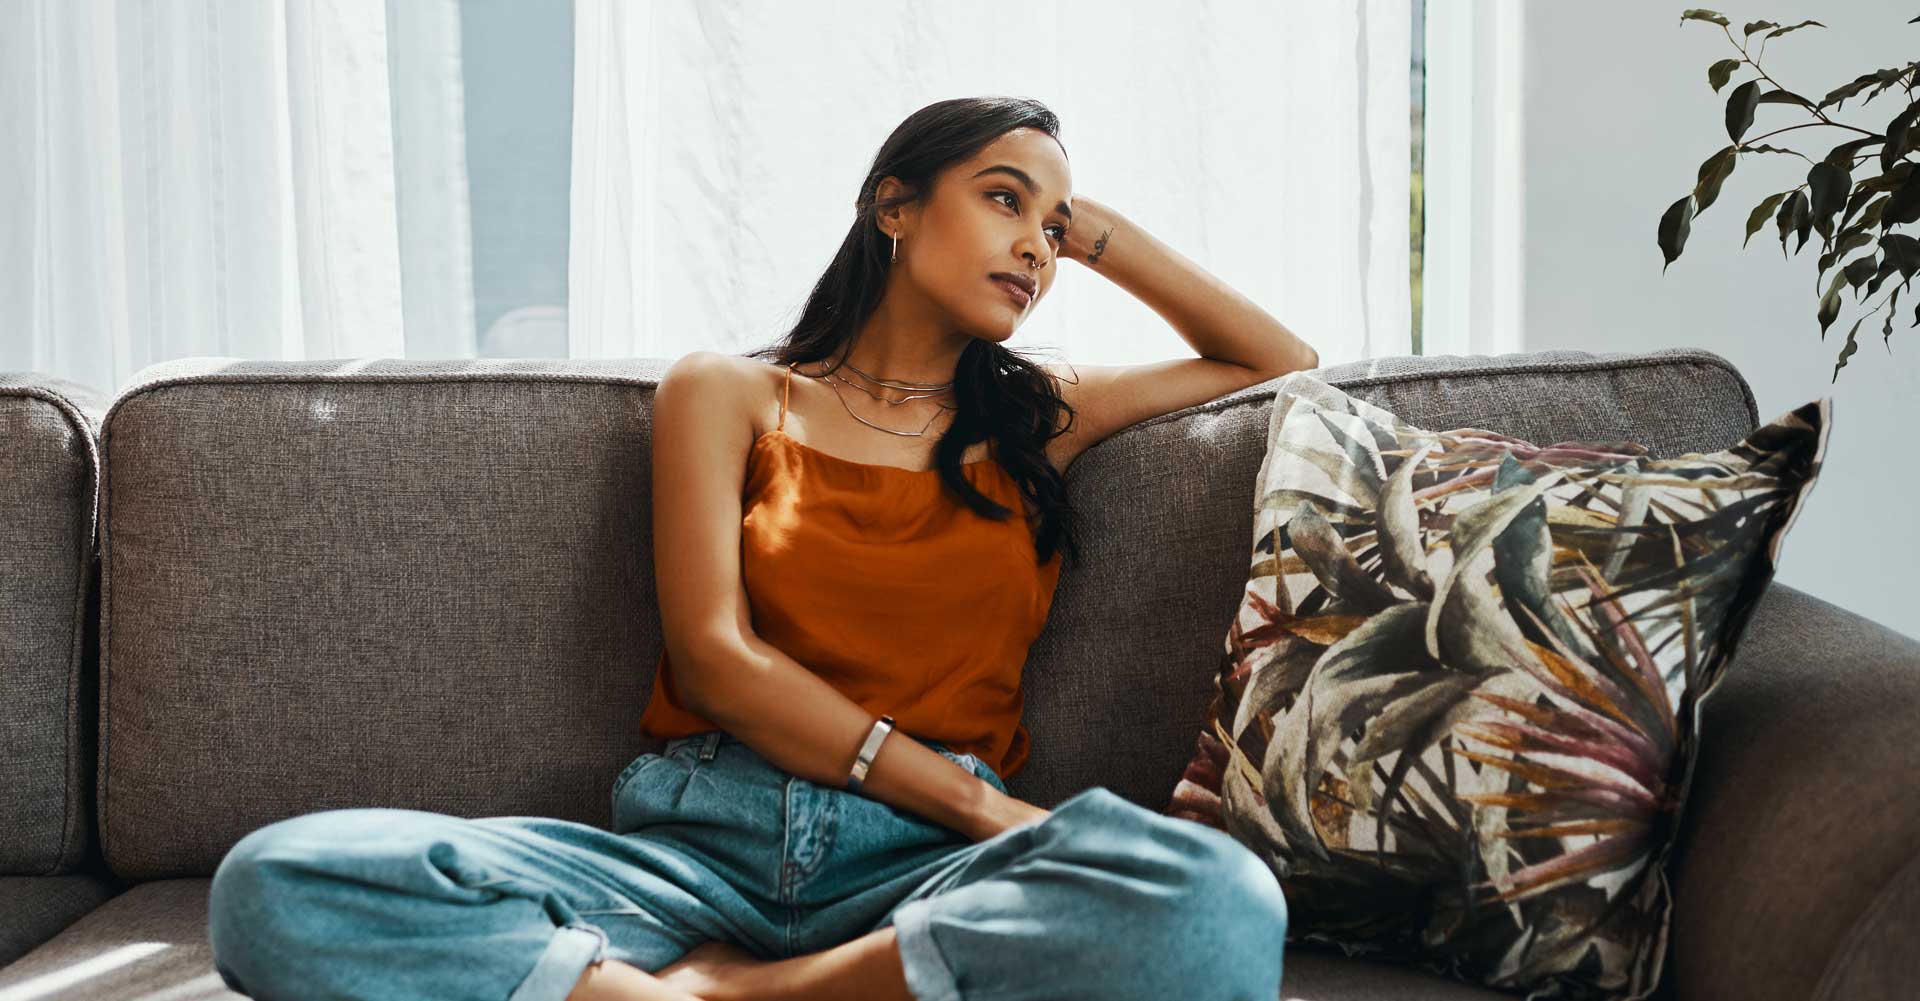 A young woman sits cross-legged on a couch. Her head is leaning on her raised arm as she looks thoughtful.